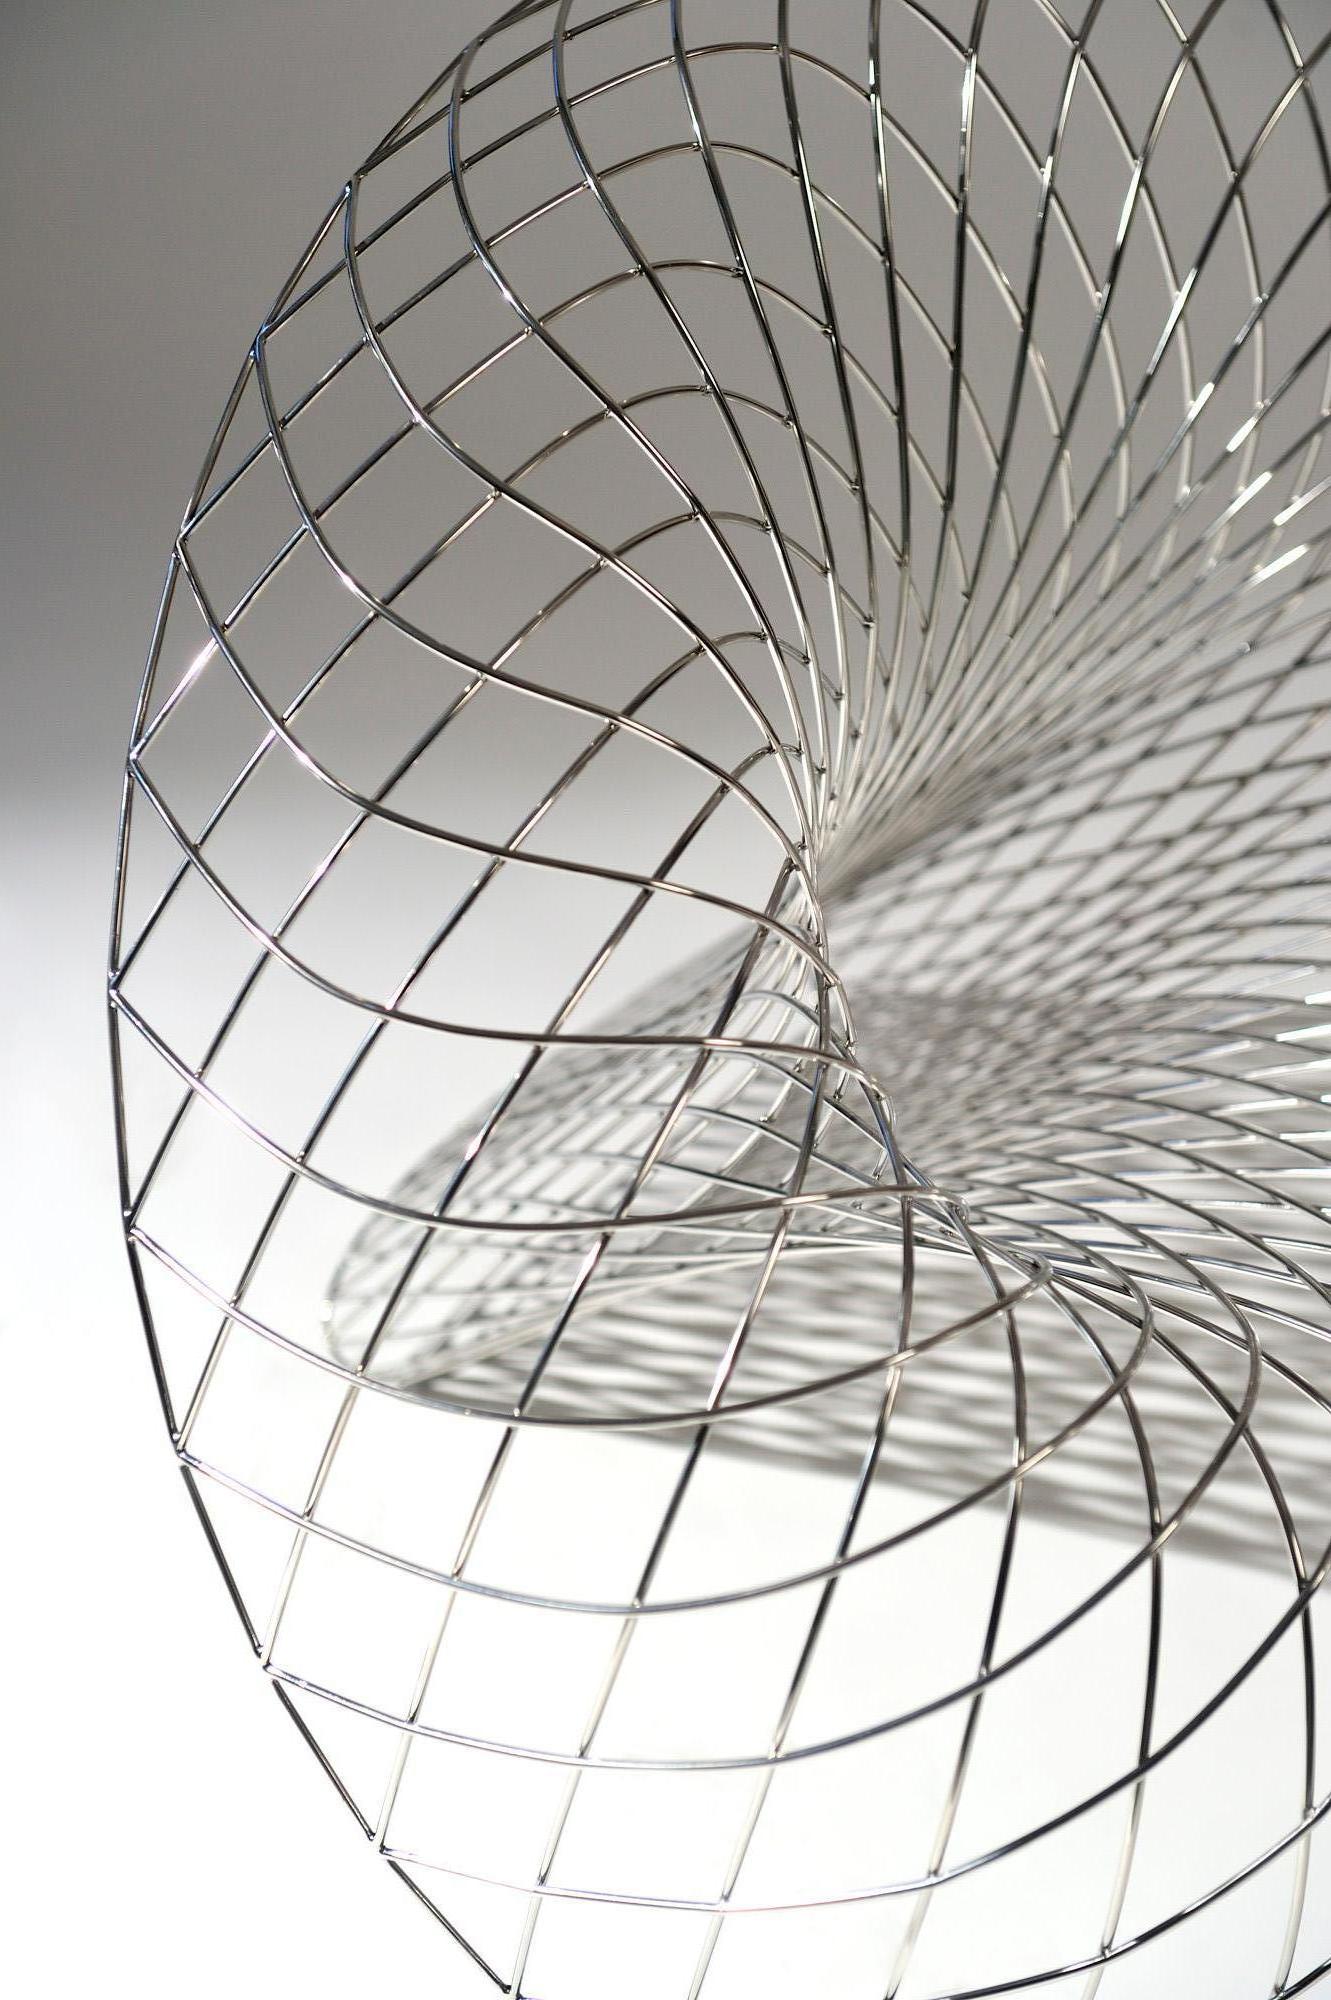 Reverb Wire Chair, Sculptural Stainless Steel Wireframe Chair by Brodie Neill (Poliert) im Angebot